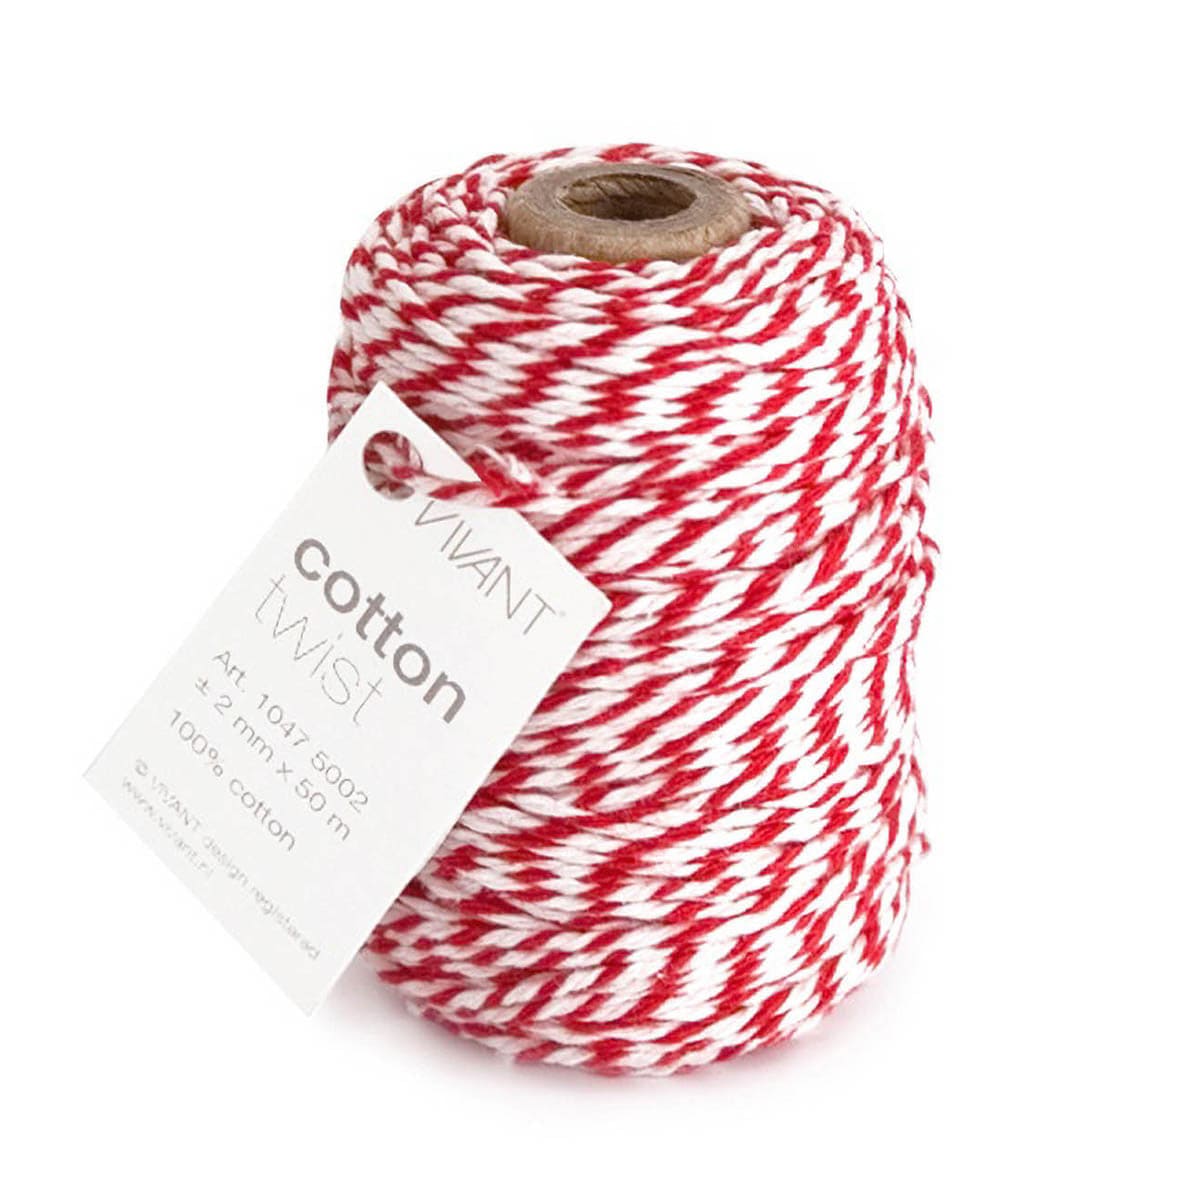 Vivant Red and White Cotton Twine - 54 yards - Spellbinders Paper Arts